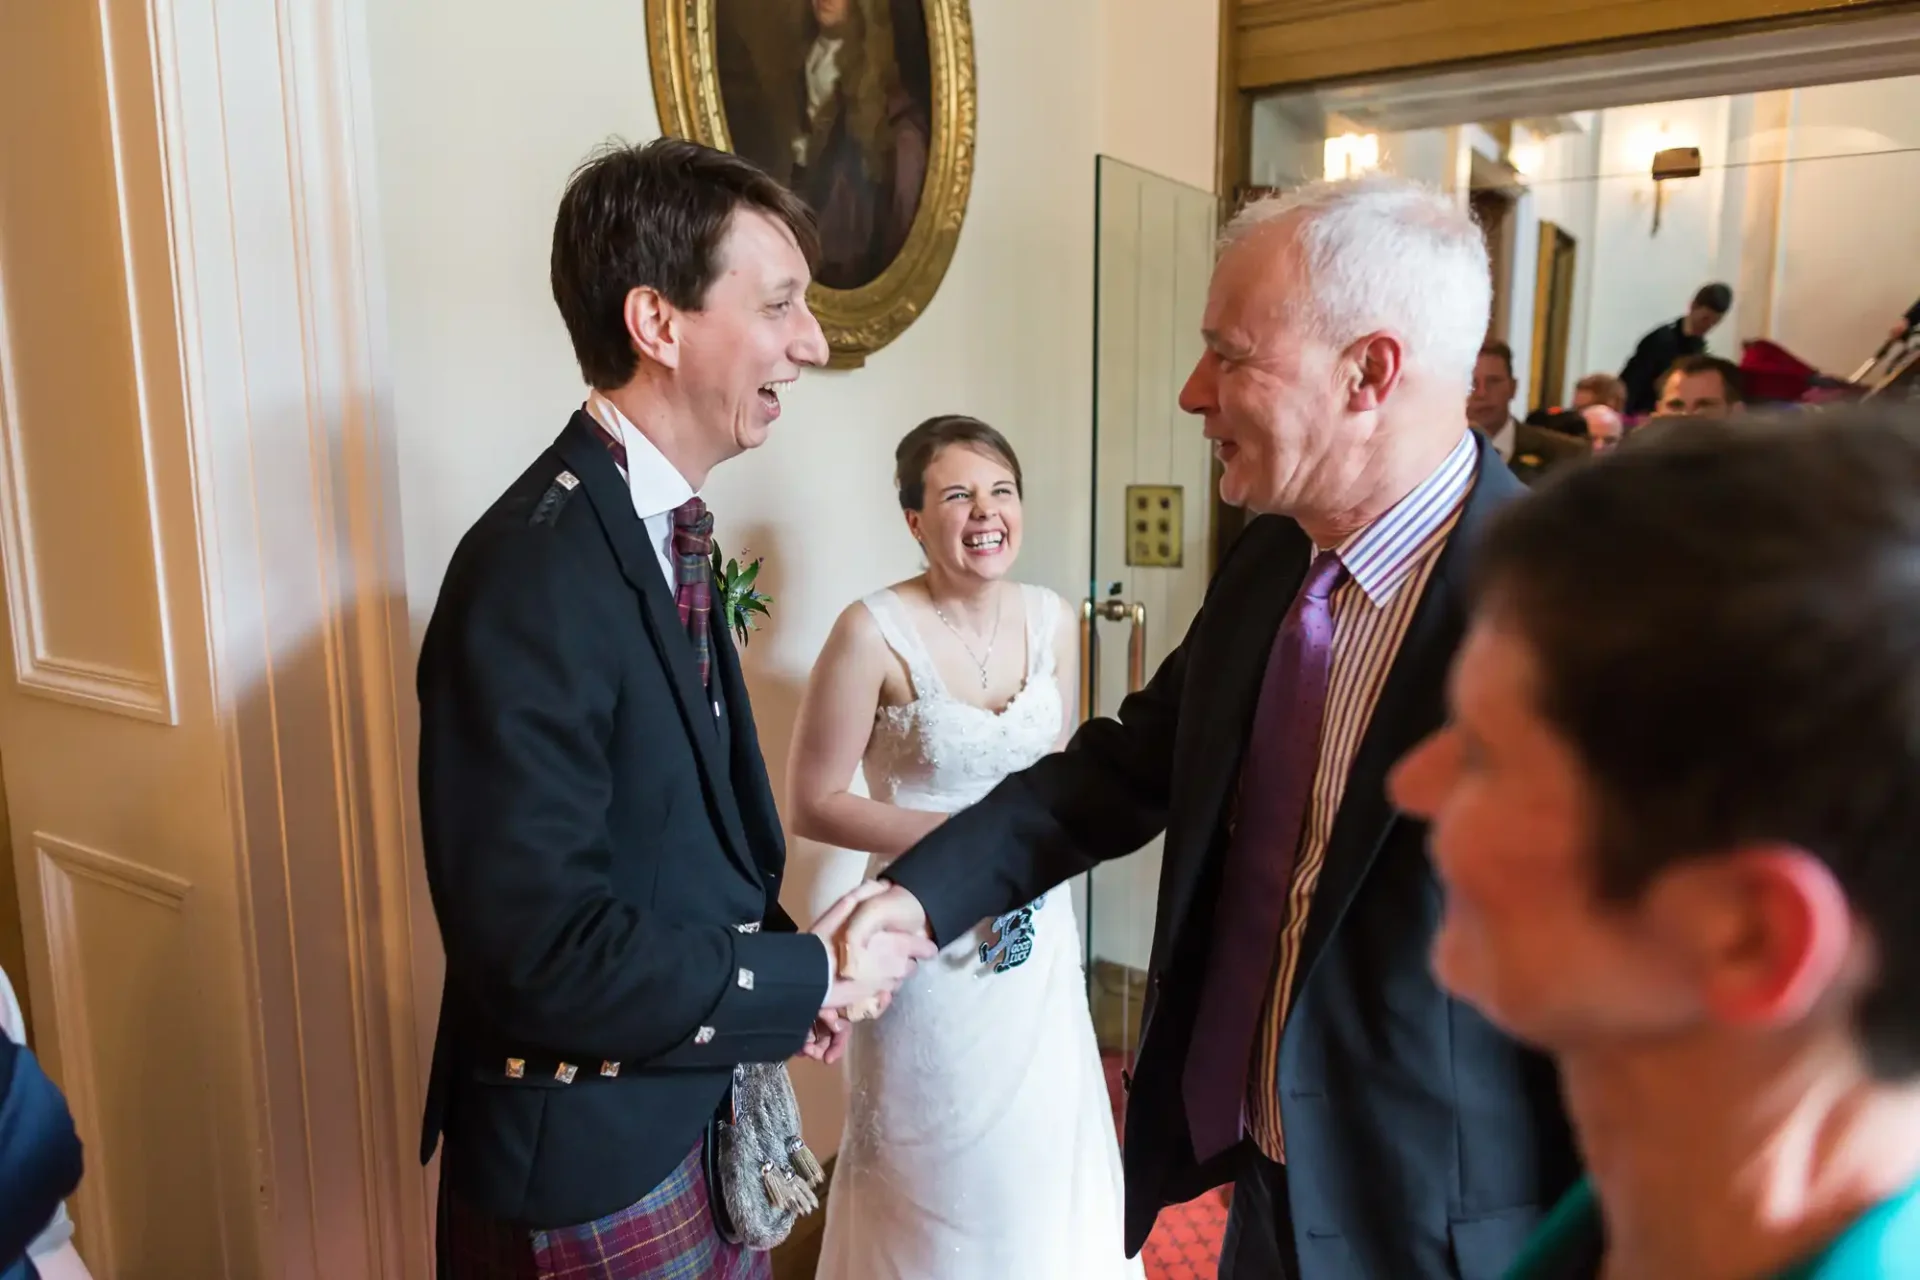 A joyful bride and groom shaking hands with an older man in a crowded room, with guests and laughter in the background.